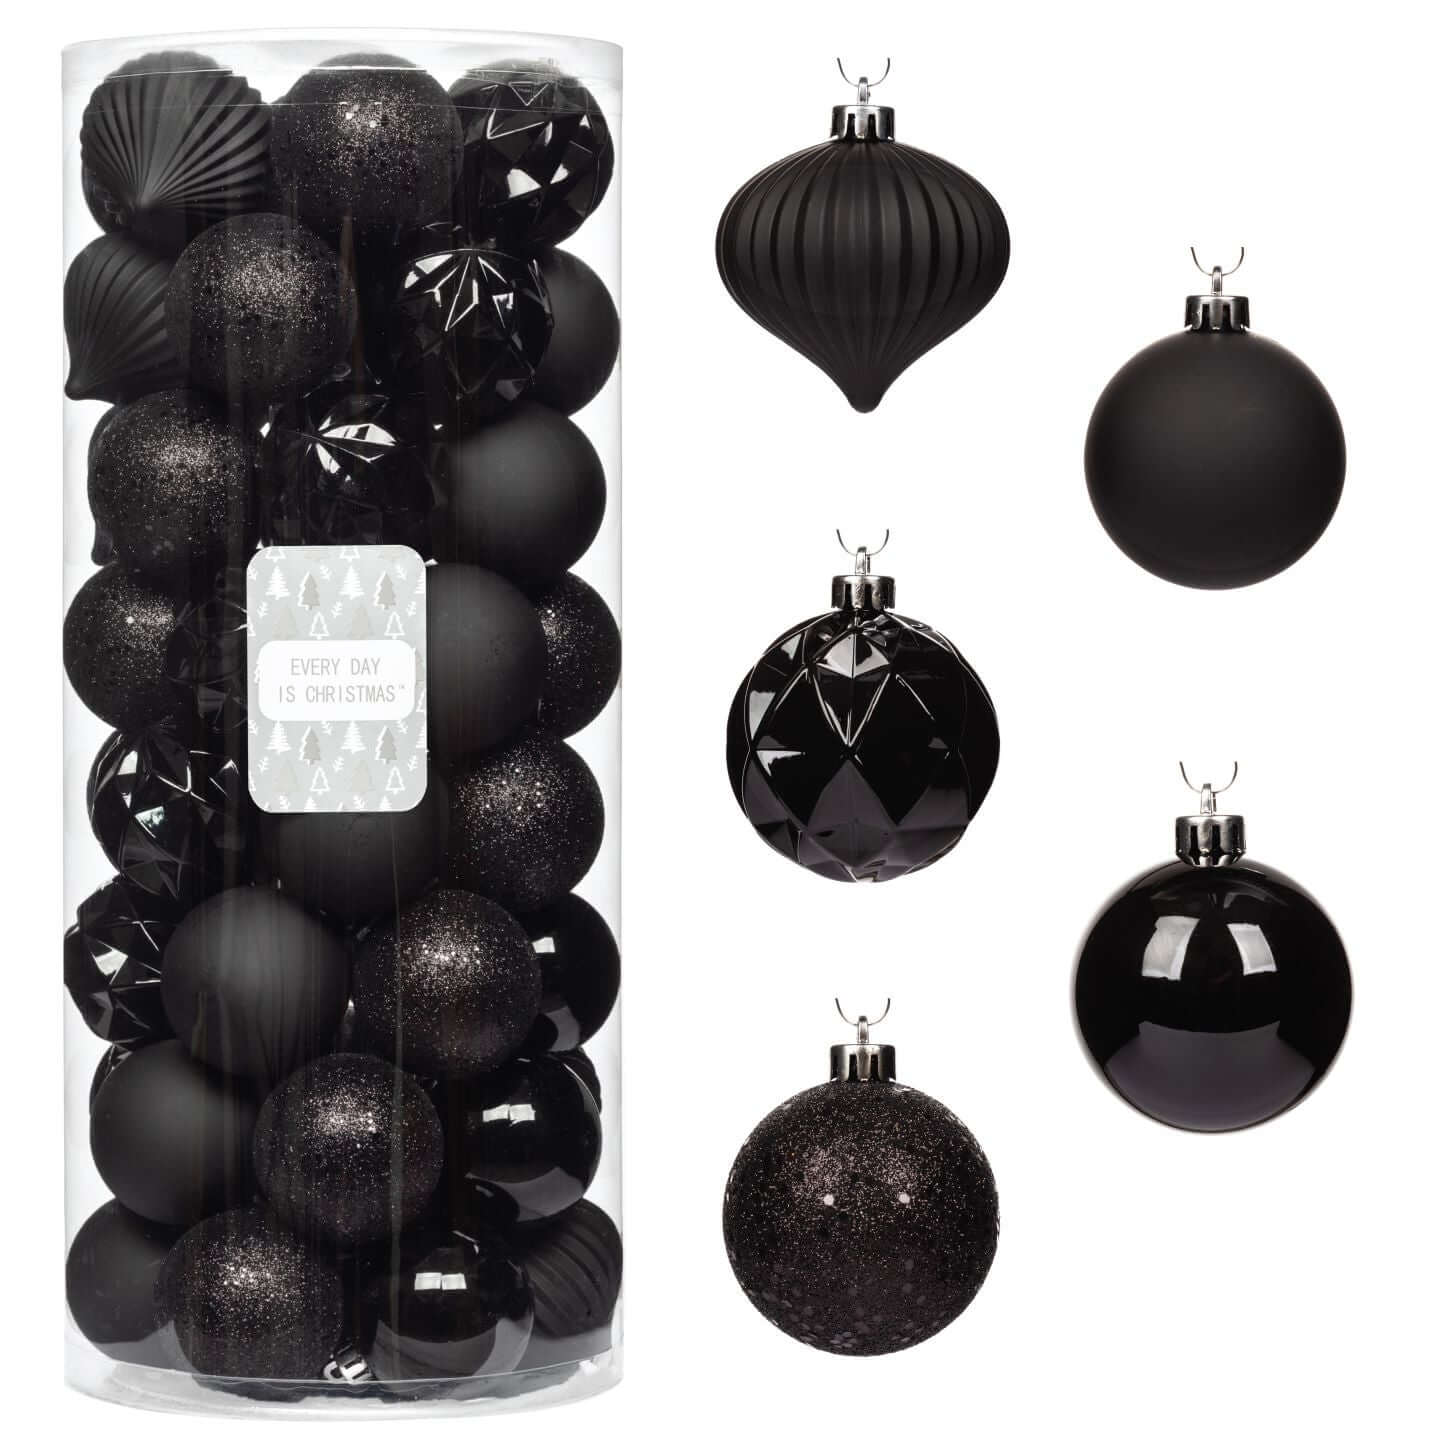 Every Day Is Christmas 50ct 57mm/ 2.24' Christmas Ornaments, Shatterproof Christmas Tree Ornaments Set, Christmas Balls Decoration (New Black)